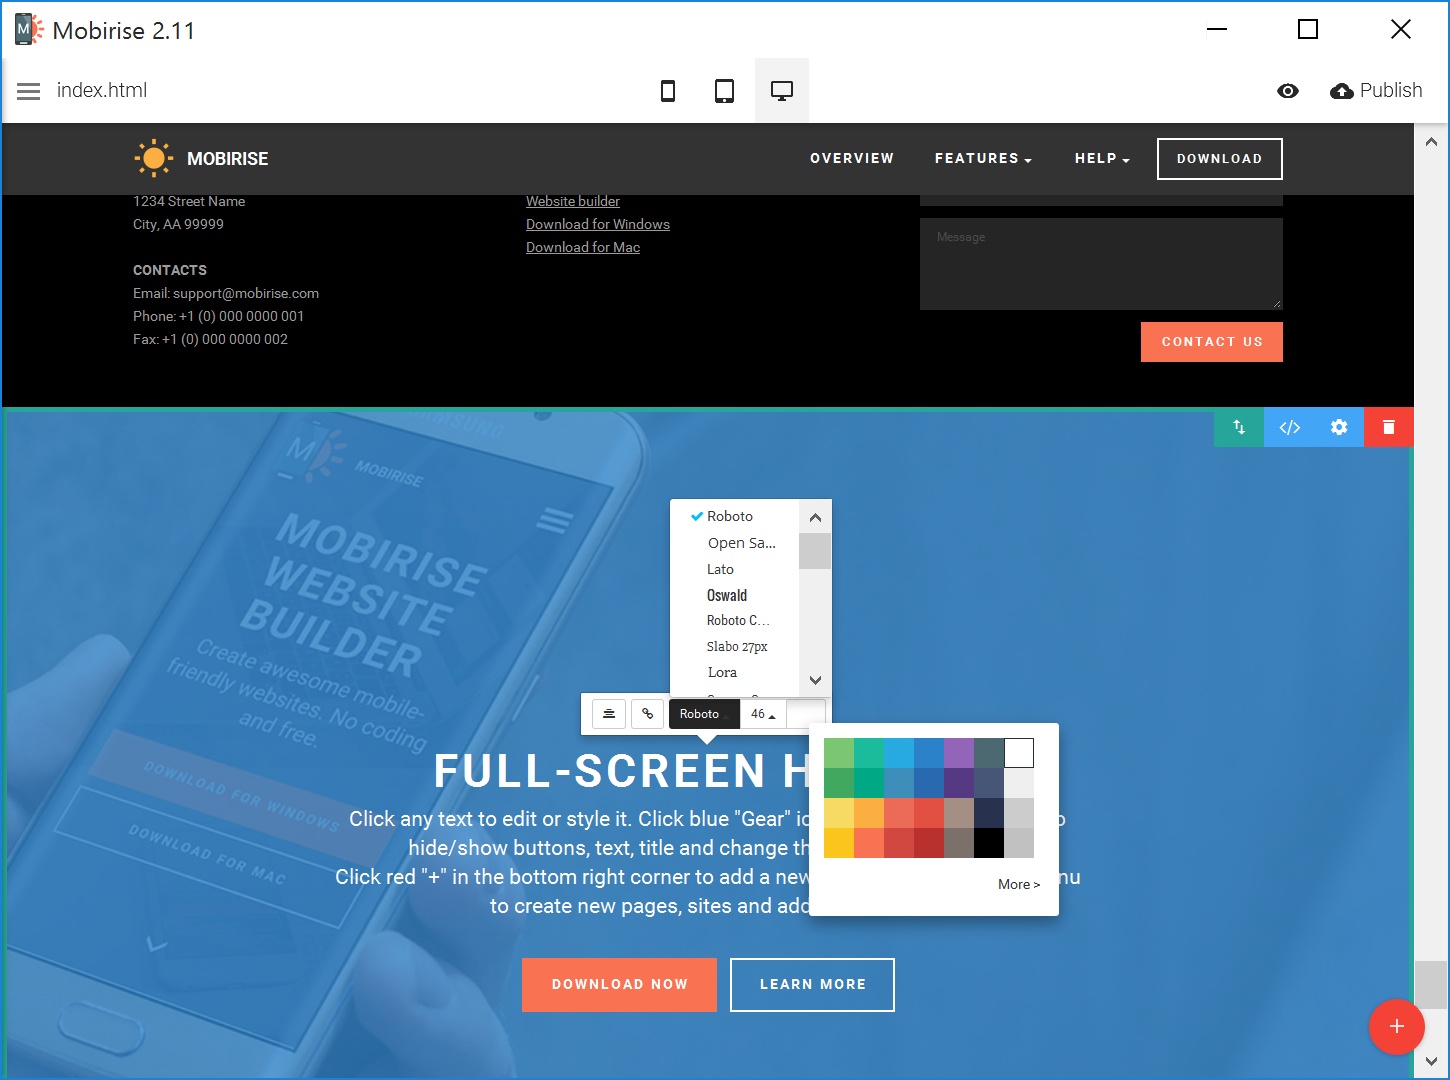  Responsive Web Page  Creator Review